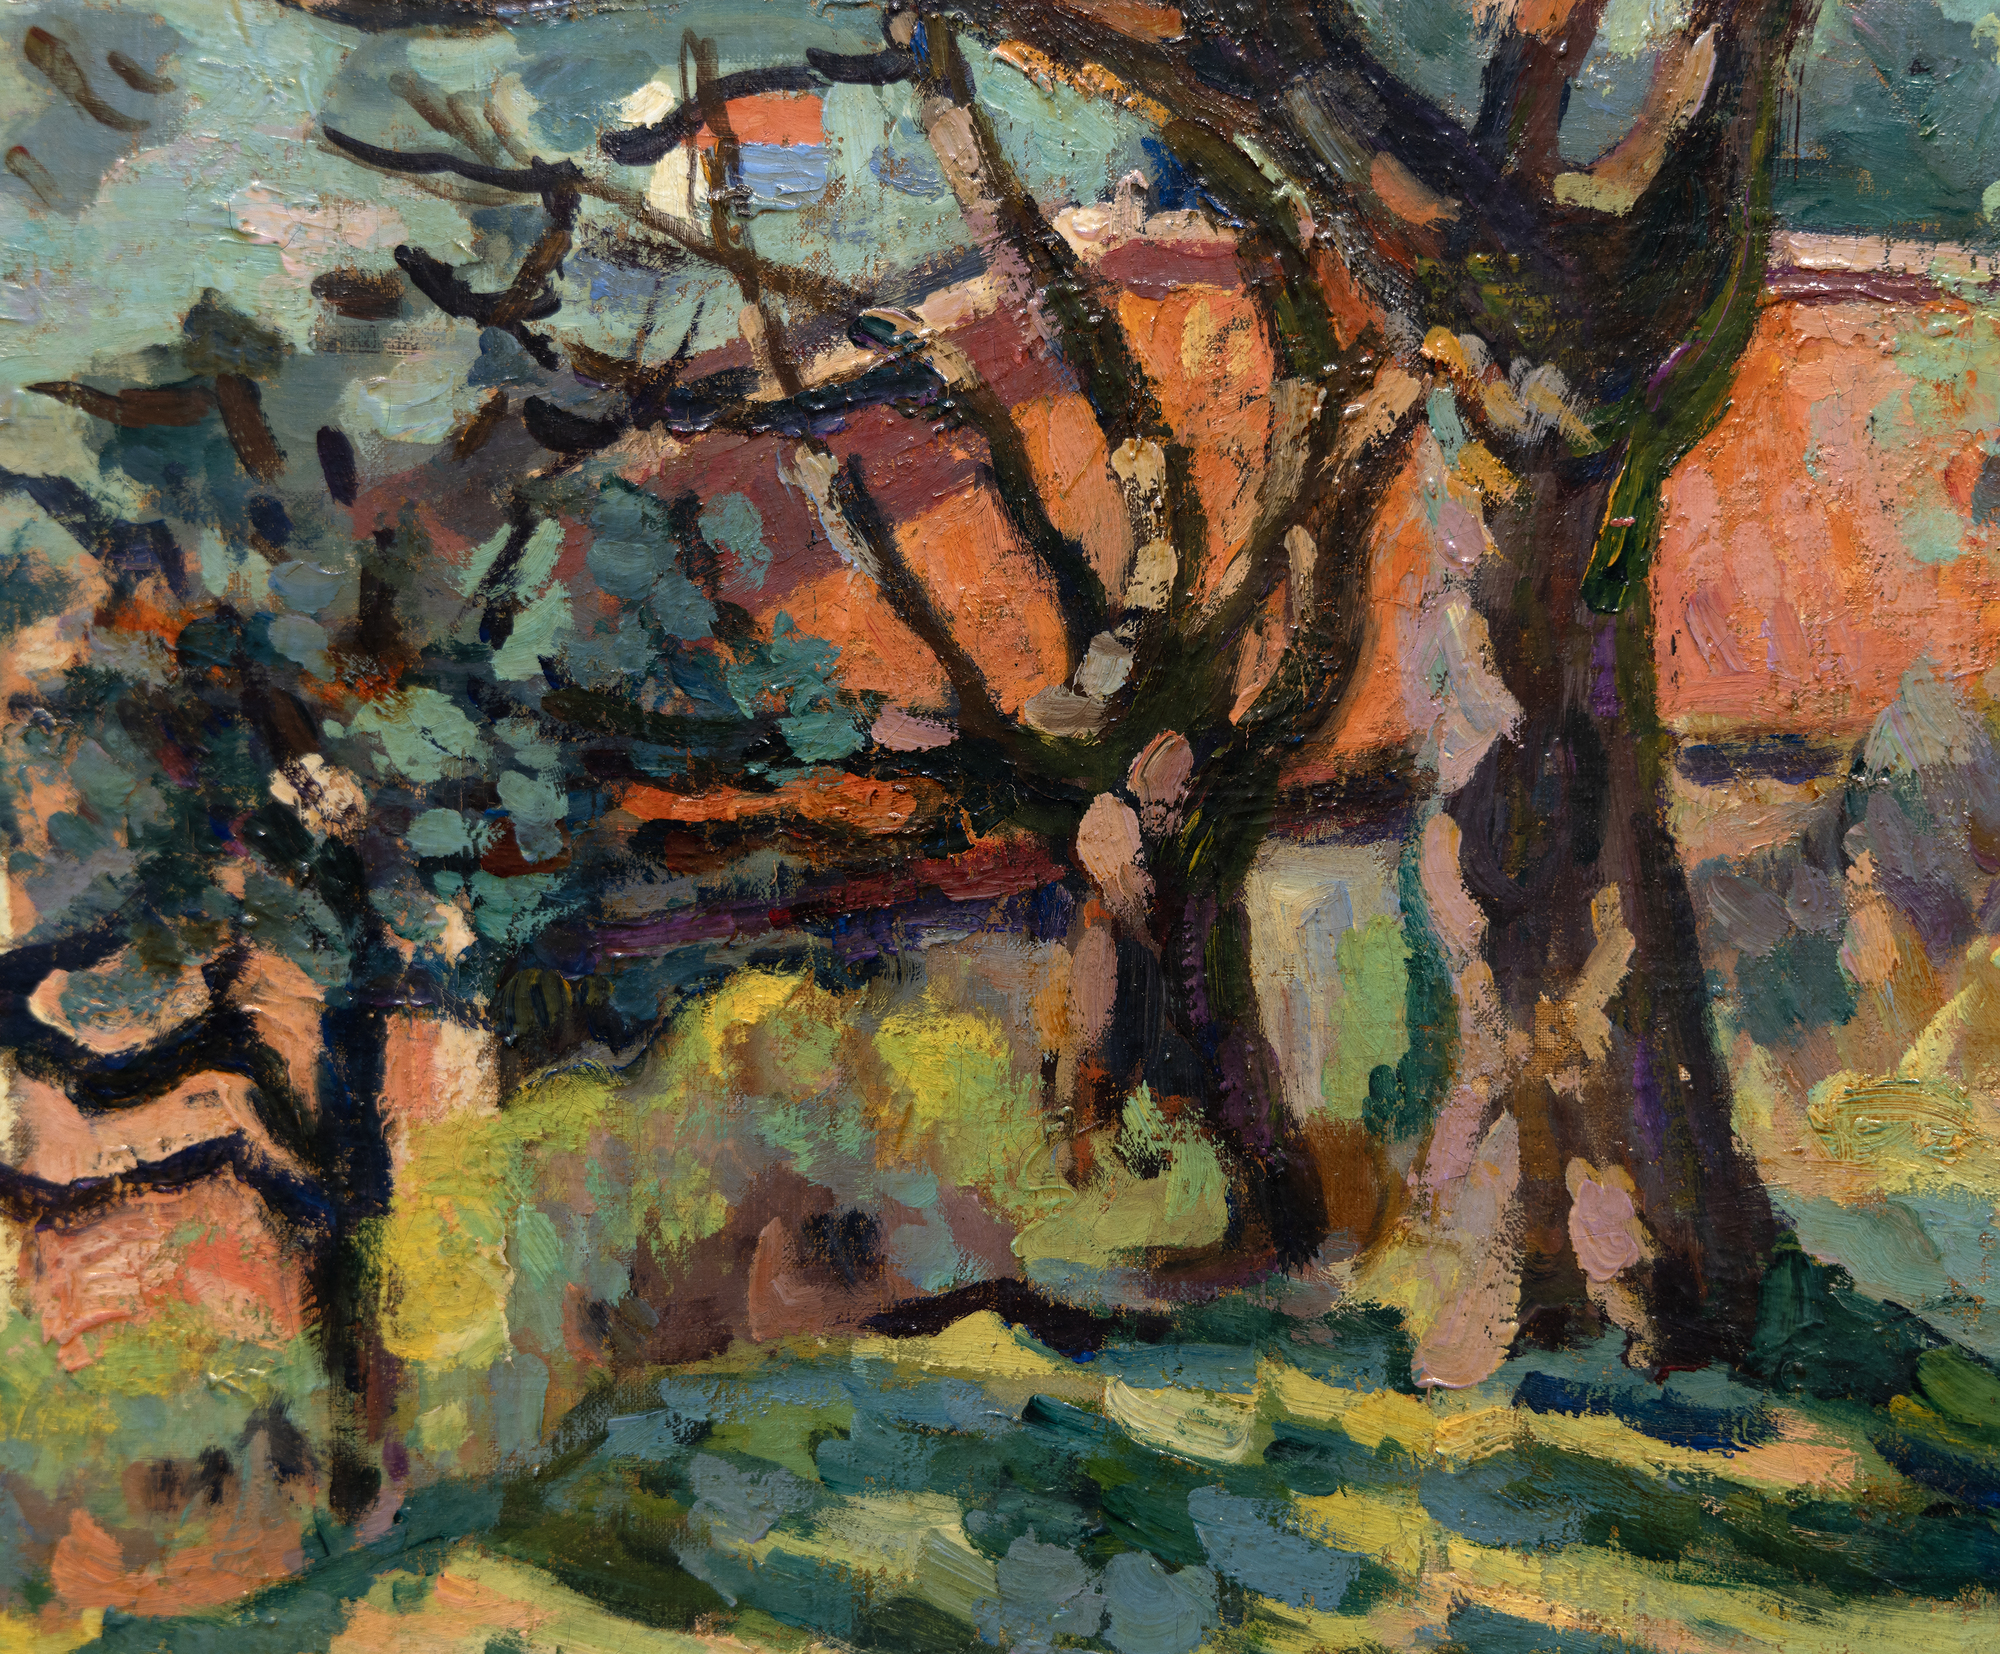 ARMAND GUILLAUMIN - Roquebrune, Le Matin - huile sur toile - 25 x 31 1/4 in.